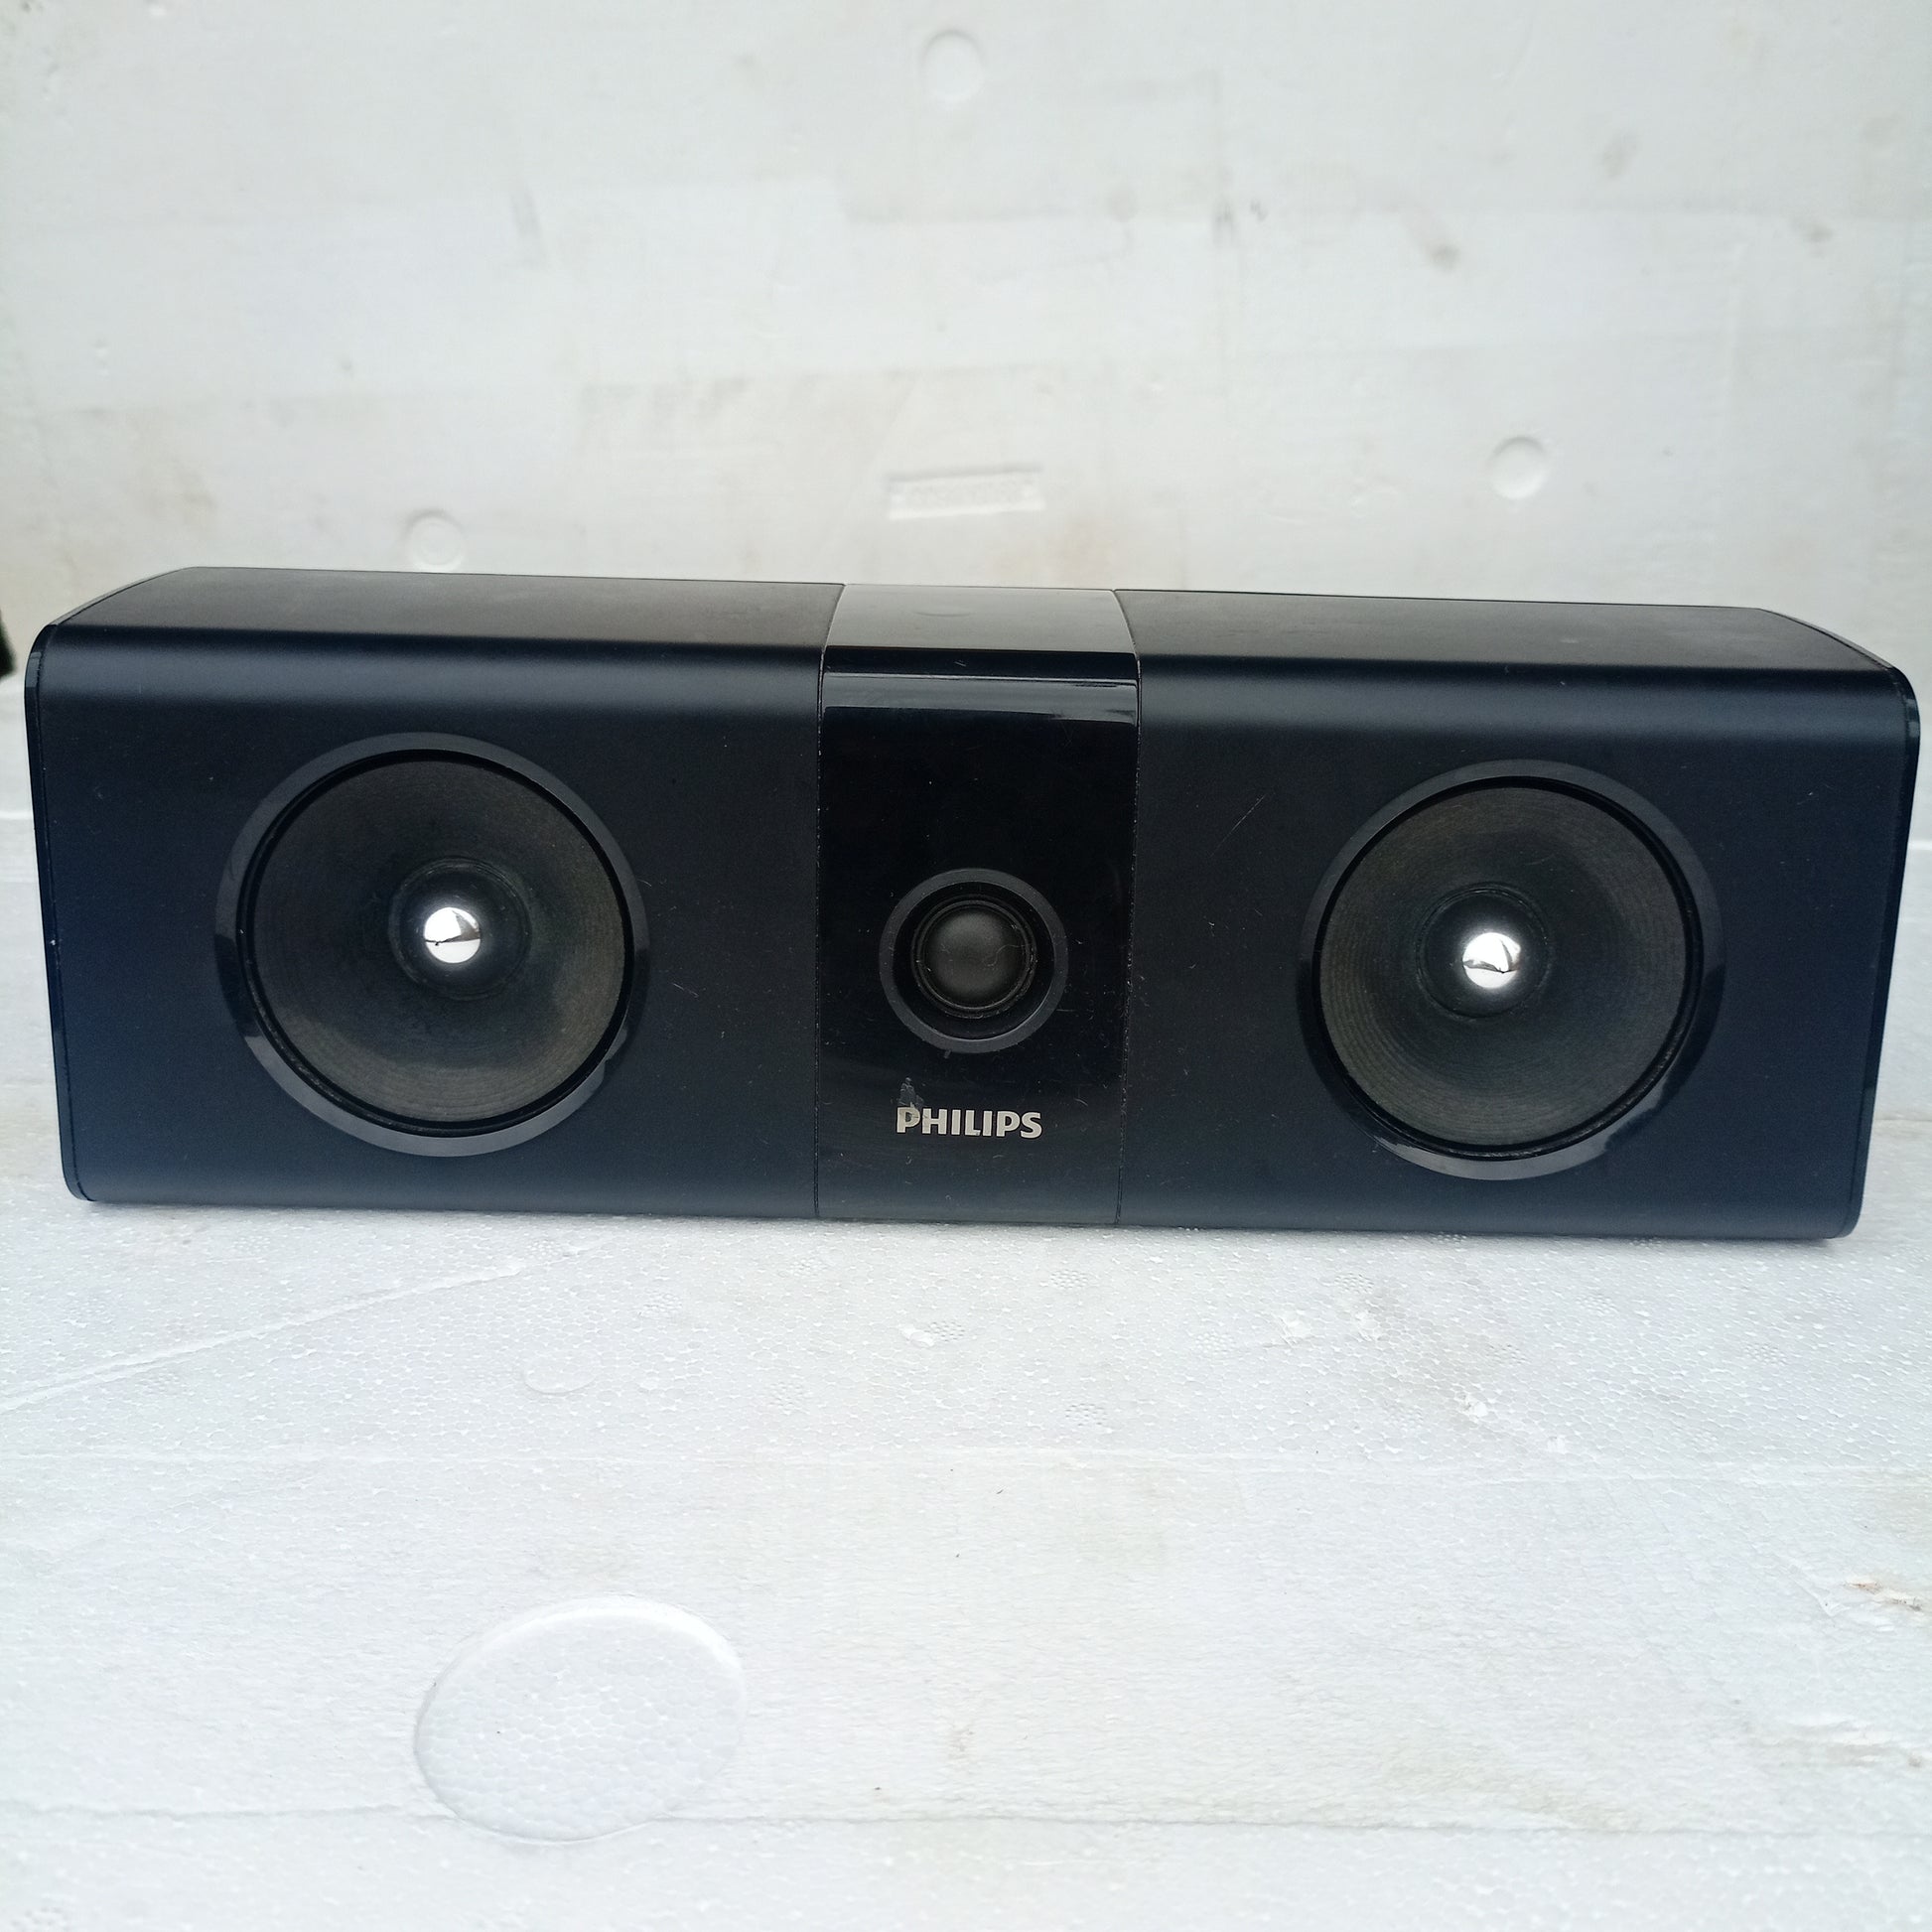 Philips HTB4510/HTB5510D 4ohms 5.0ch Surround Speakers - Front of Center